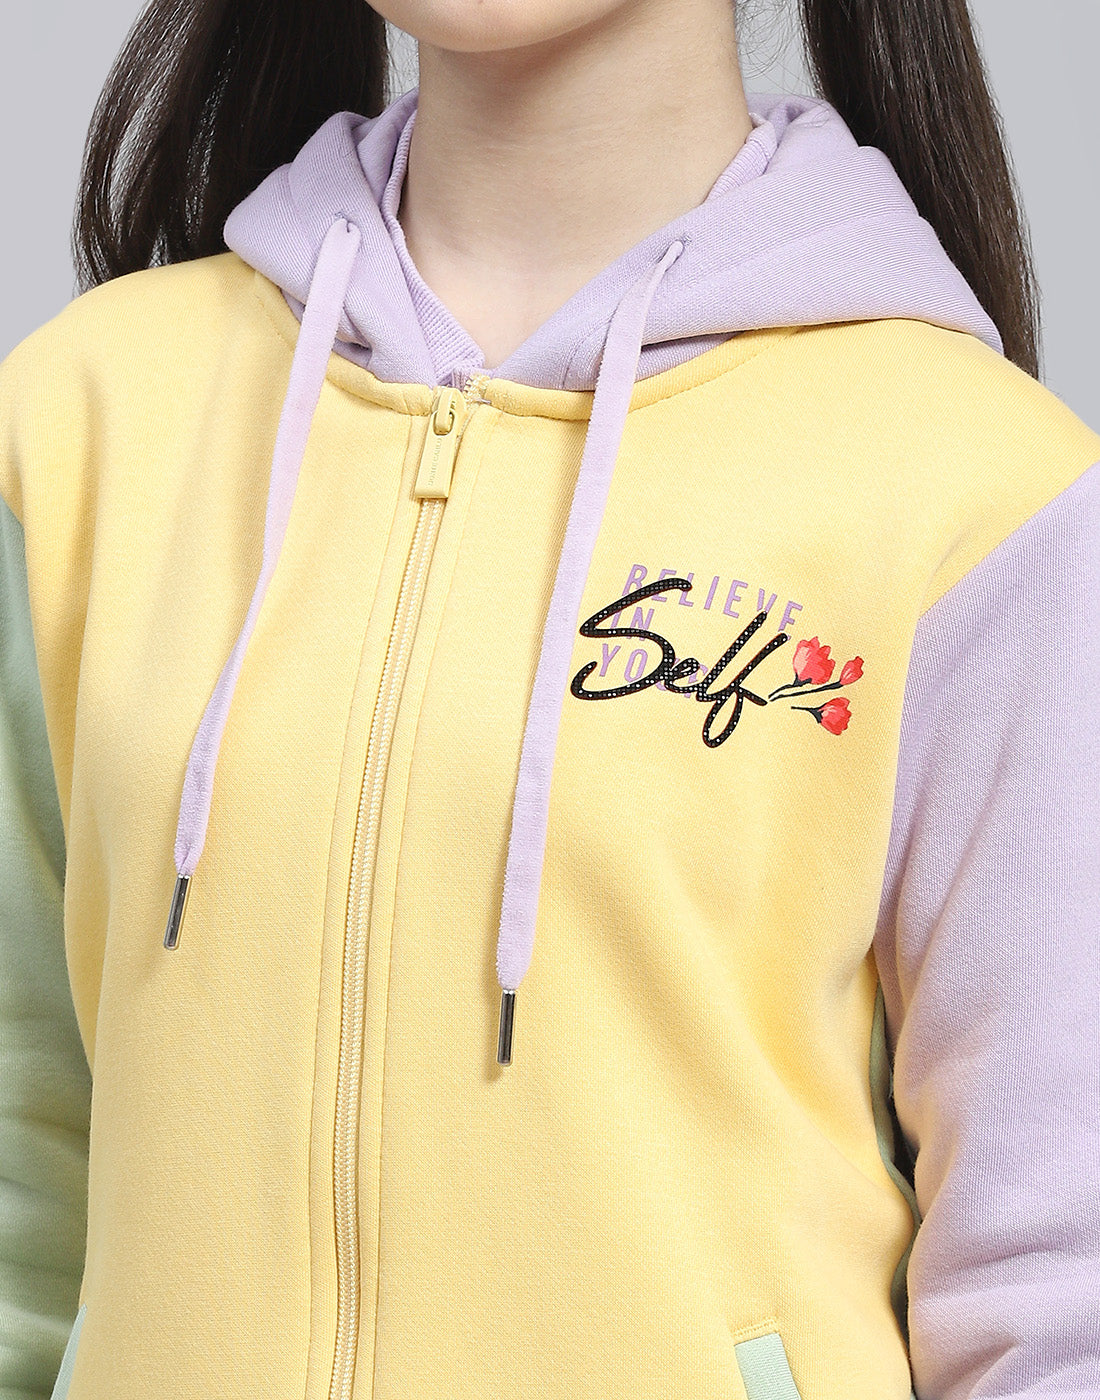 Girls Yellow Printed Hooded Full Sleeve Tracksuit